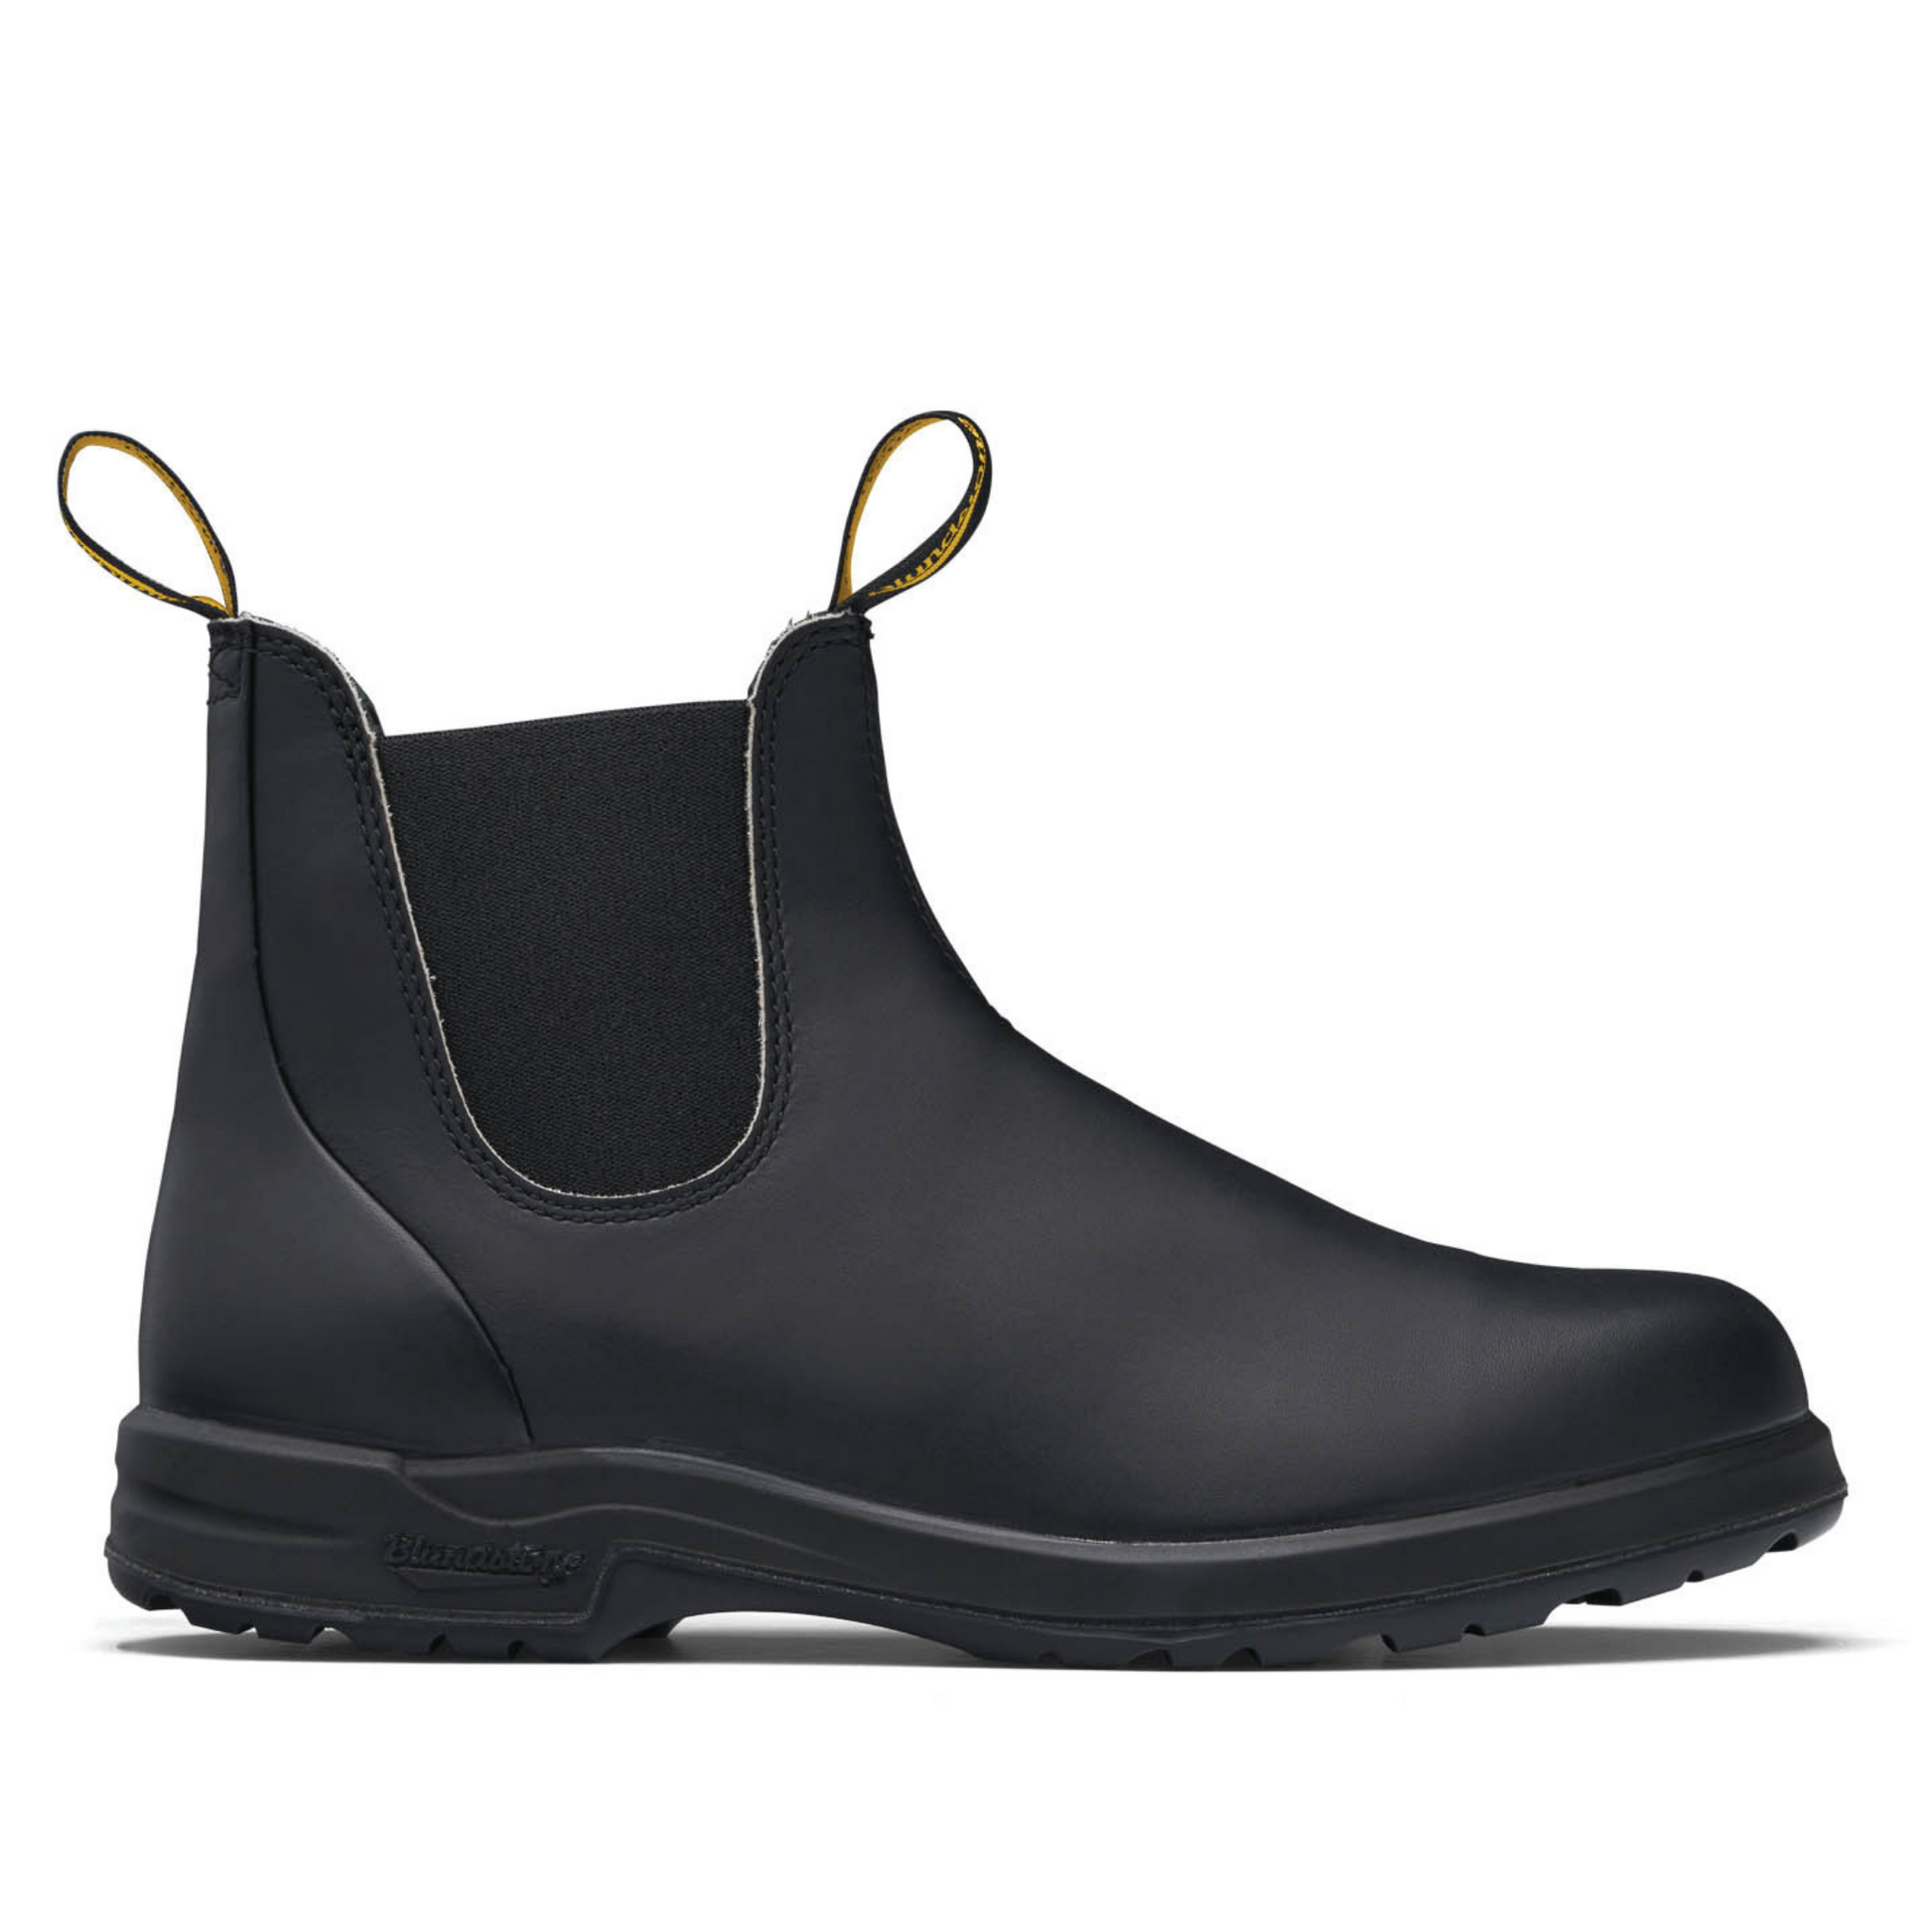 Black leather boots with black sole and black elastic sides